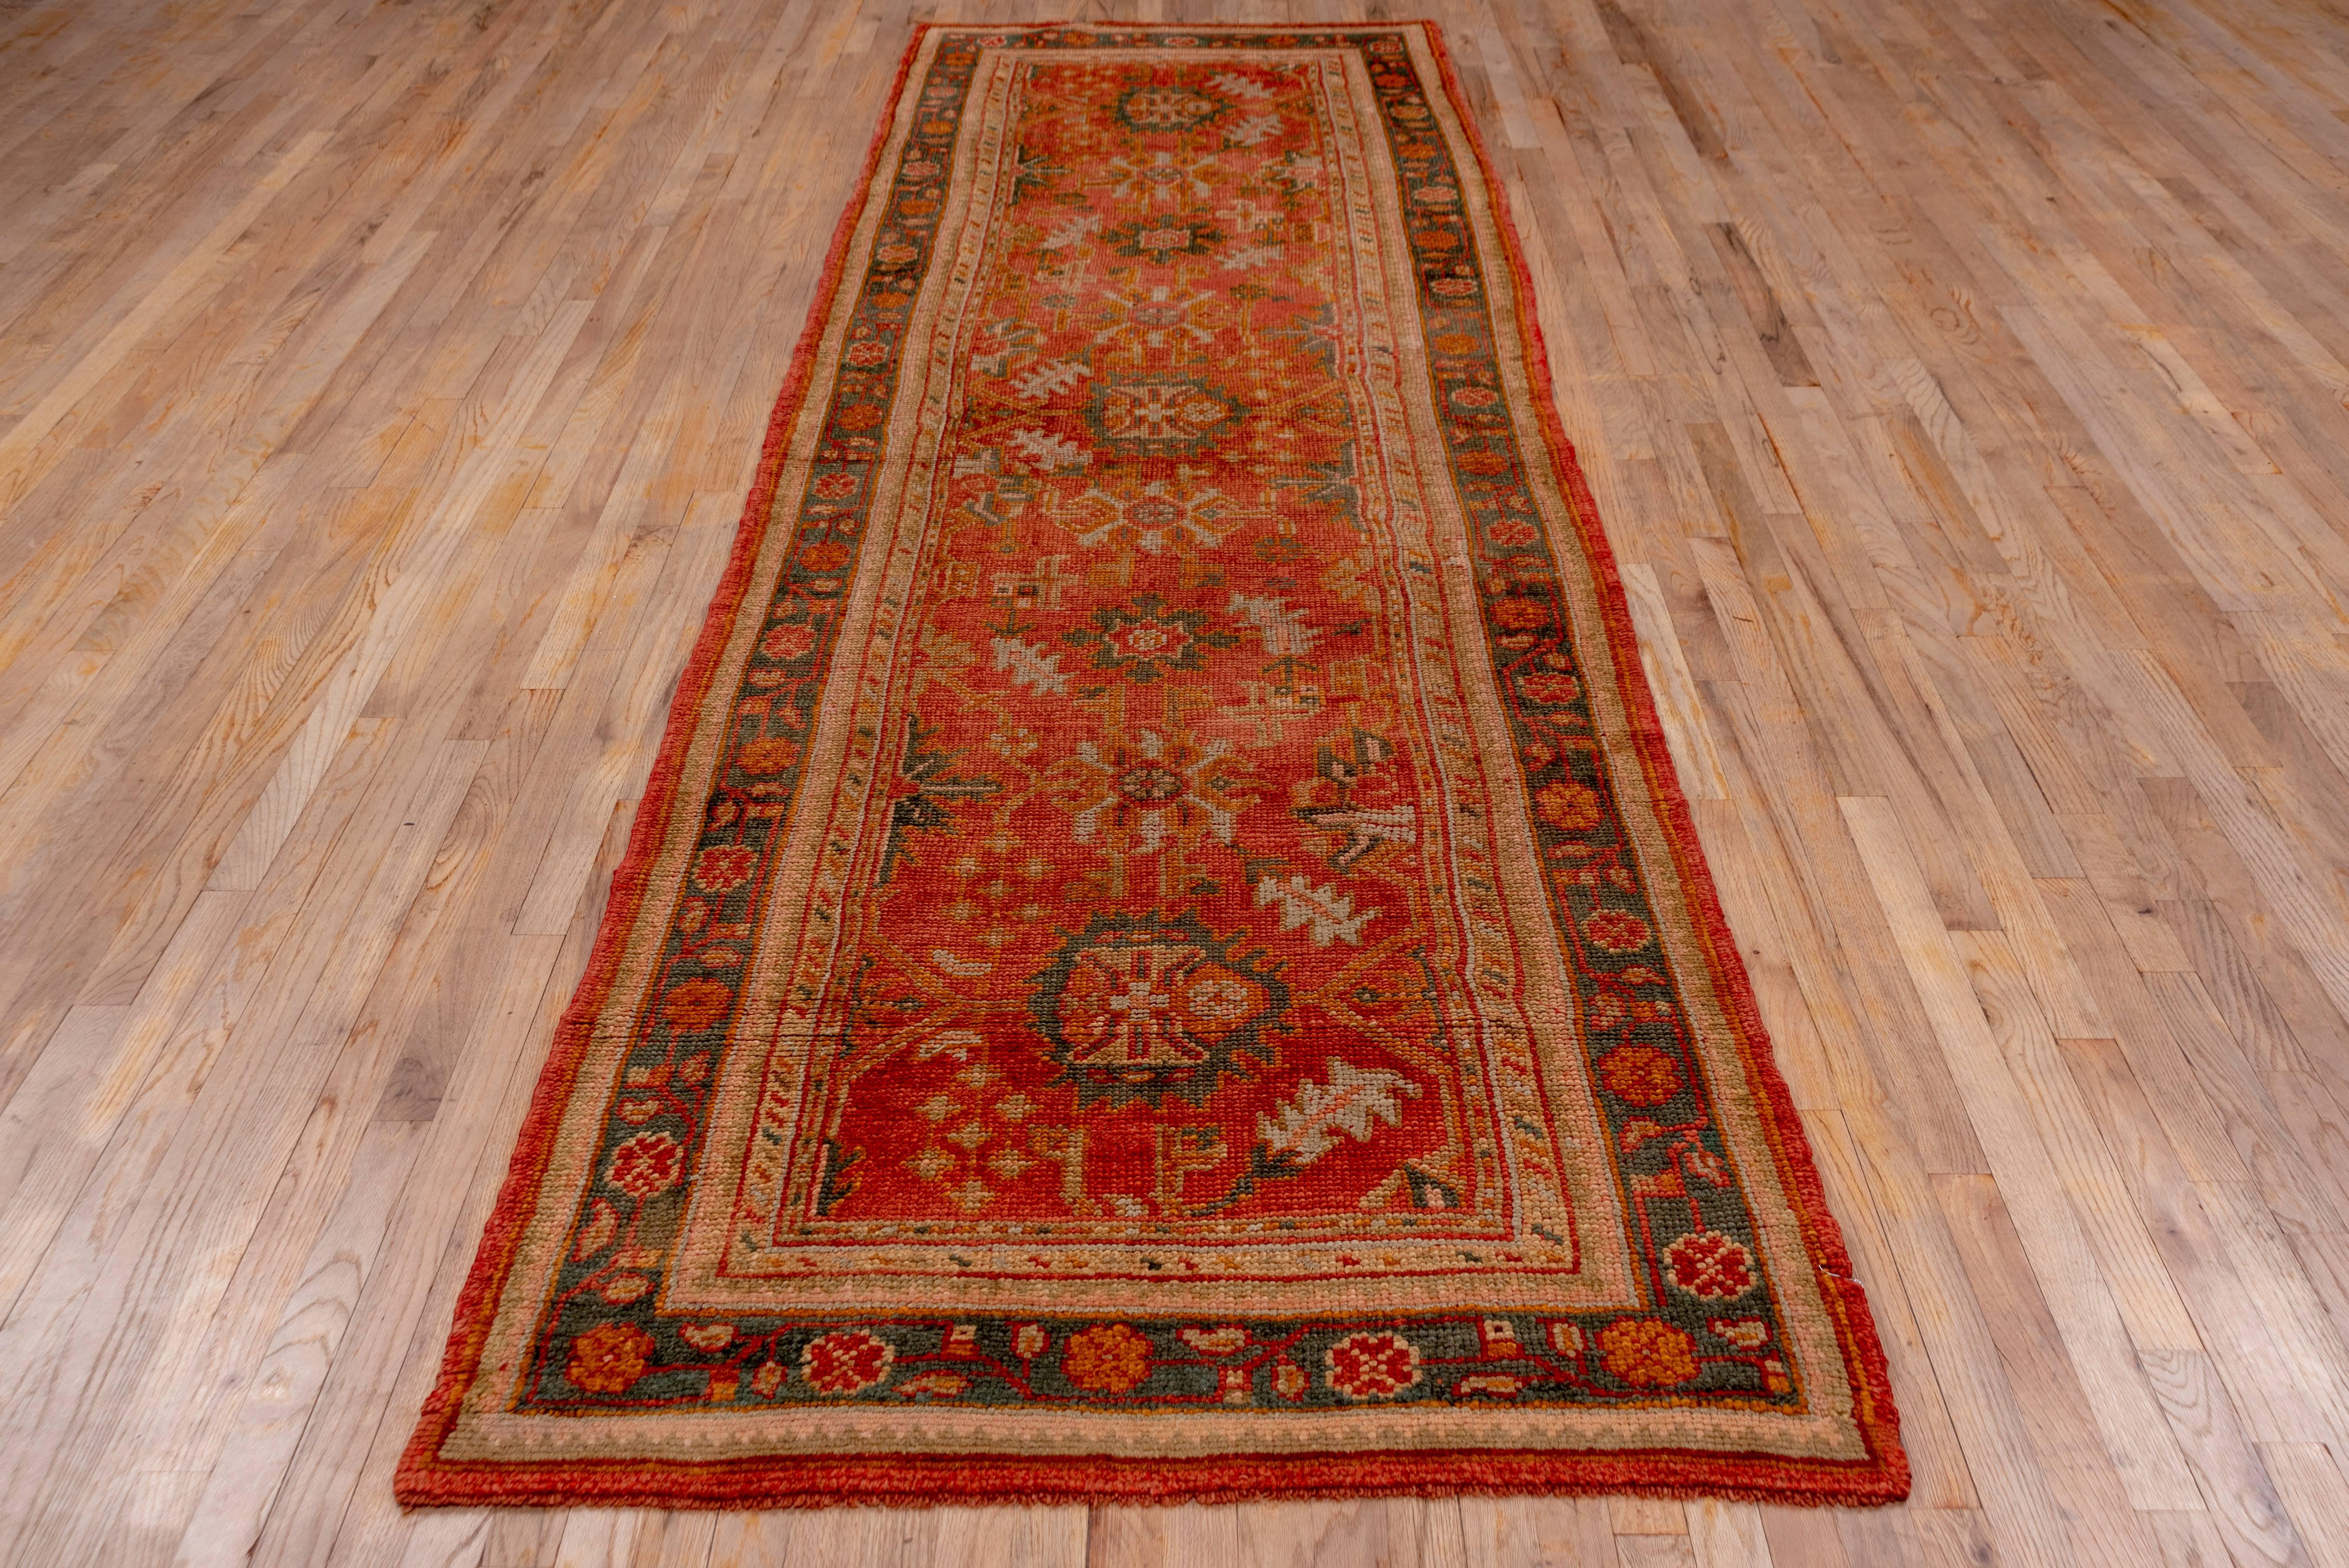 This vintage 1920s Oushak runner has been woven in a village setting by an experienced weaver. At first glance, it may seem the pattern is somewhat random but is actually well balanced. Complimenting the design with an understated palette makes a